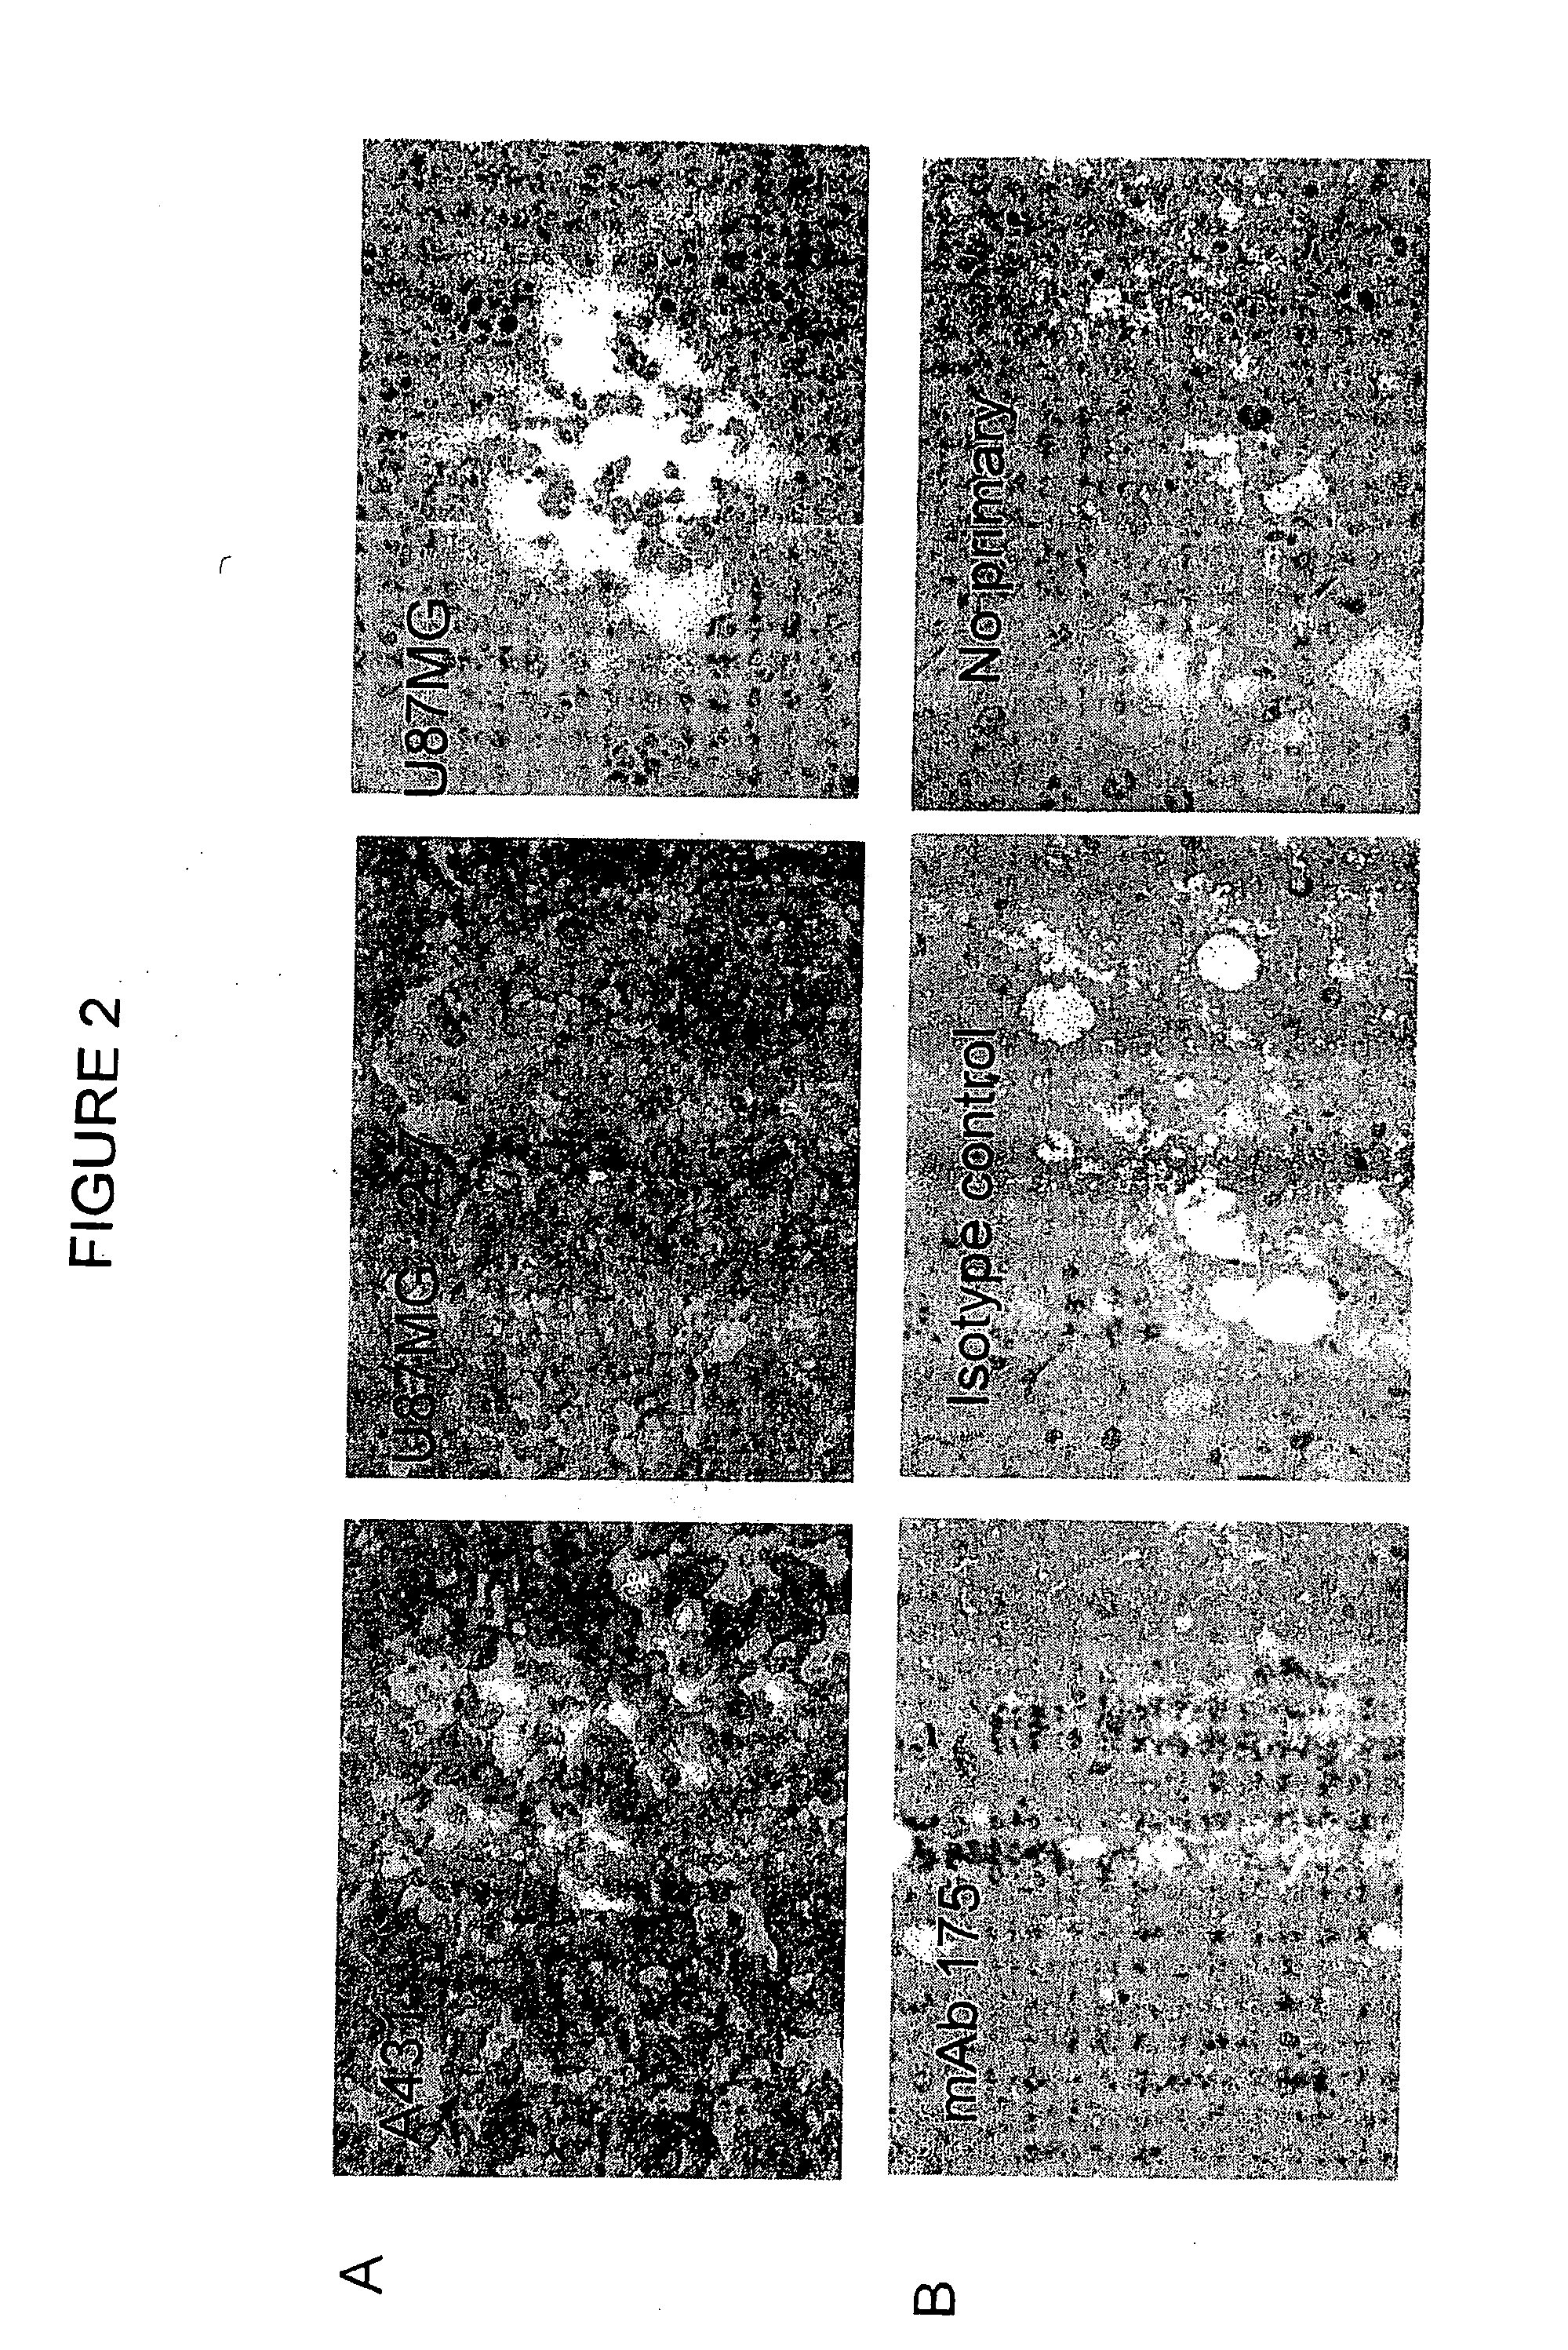 Monoclonal antibody 175 tageting the egf receptor and derivatives and uses thereof